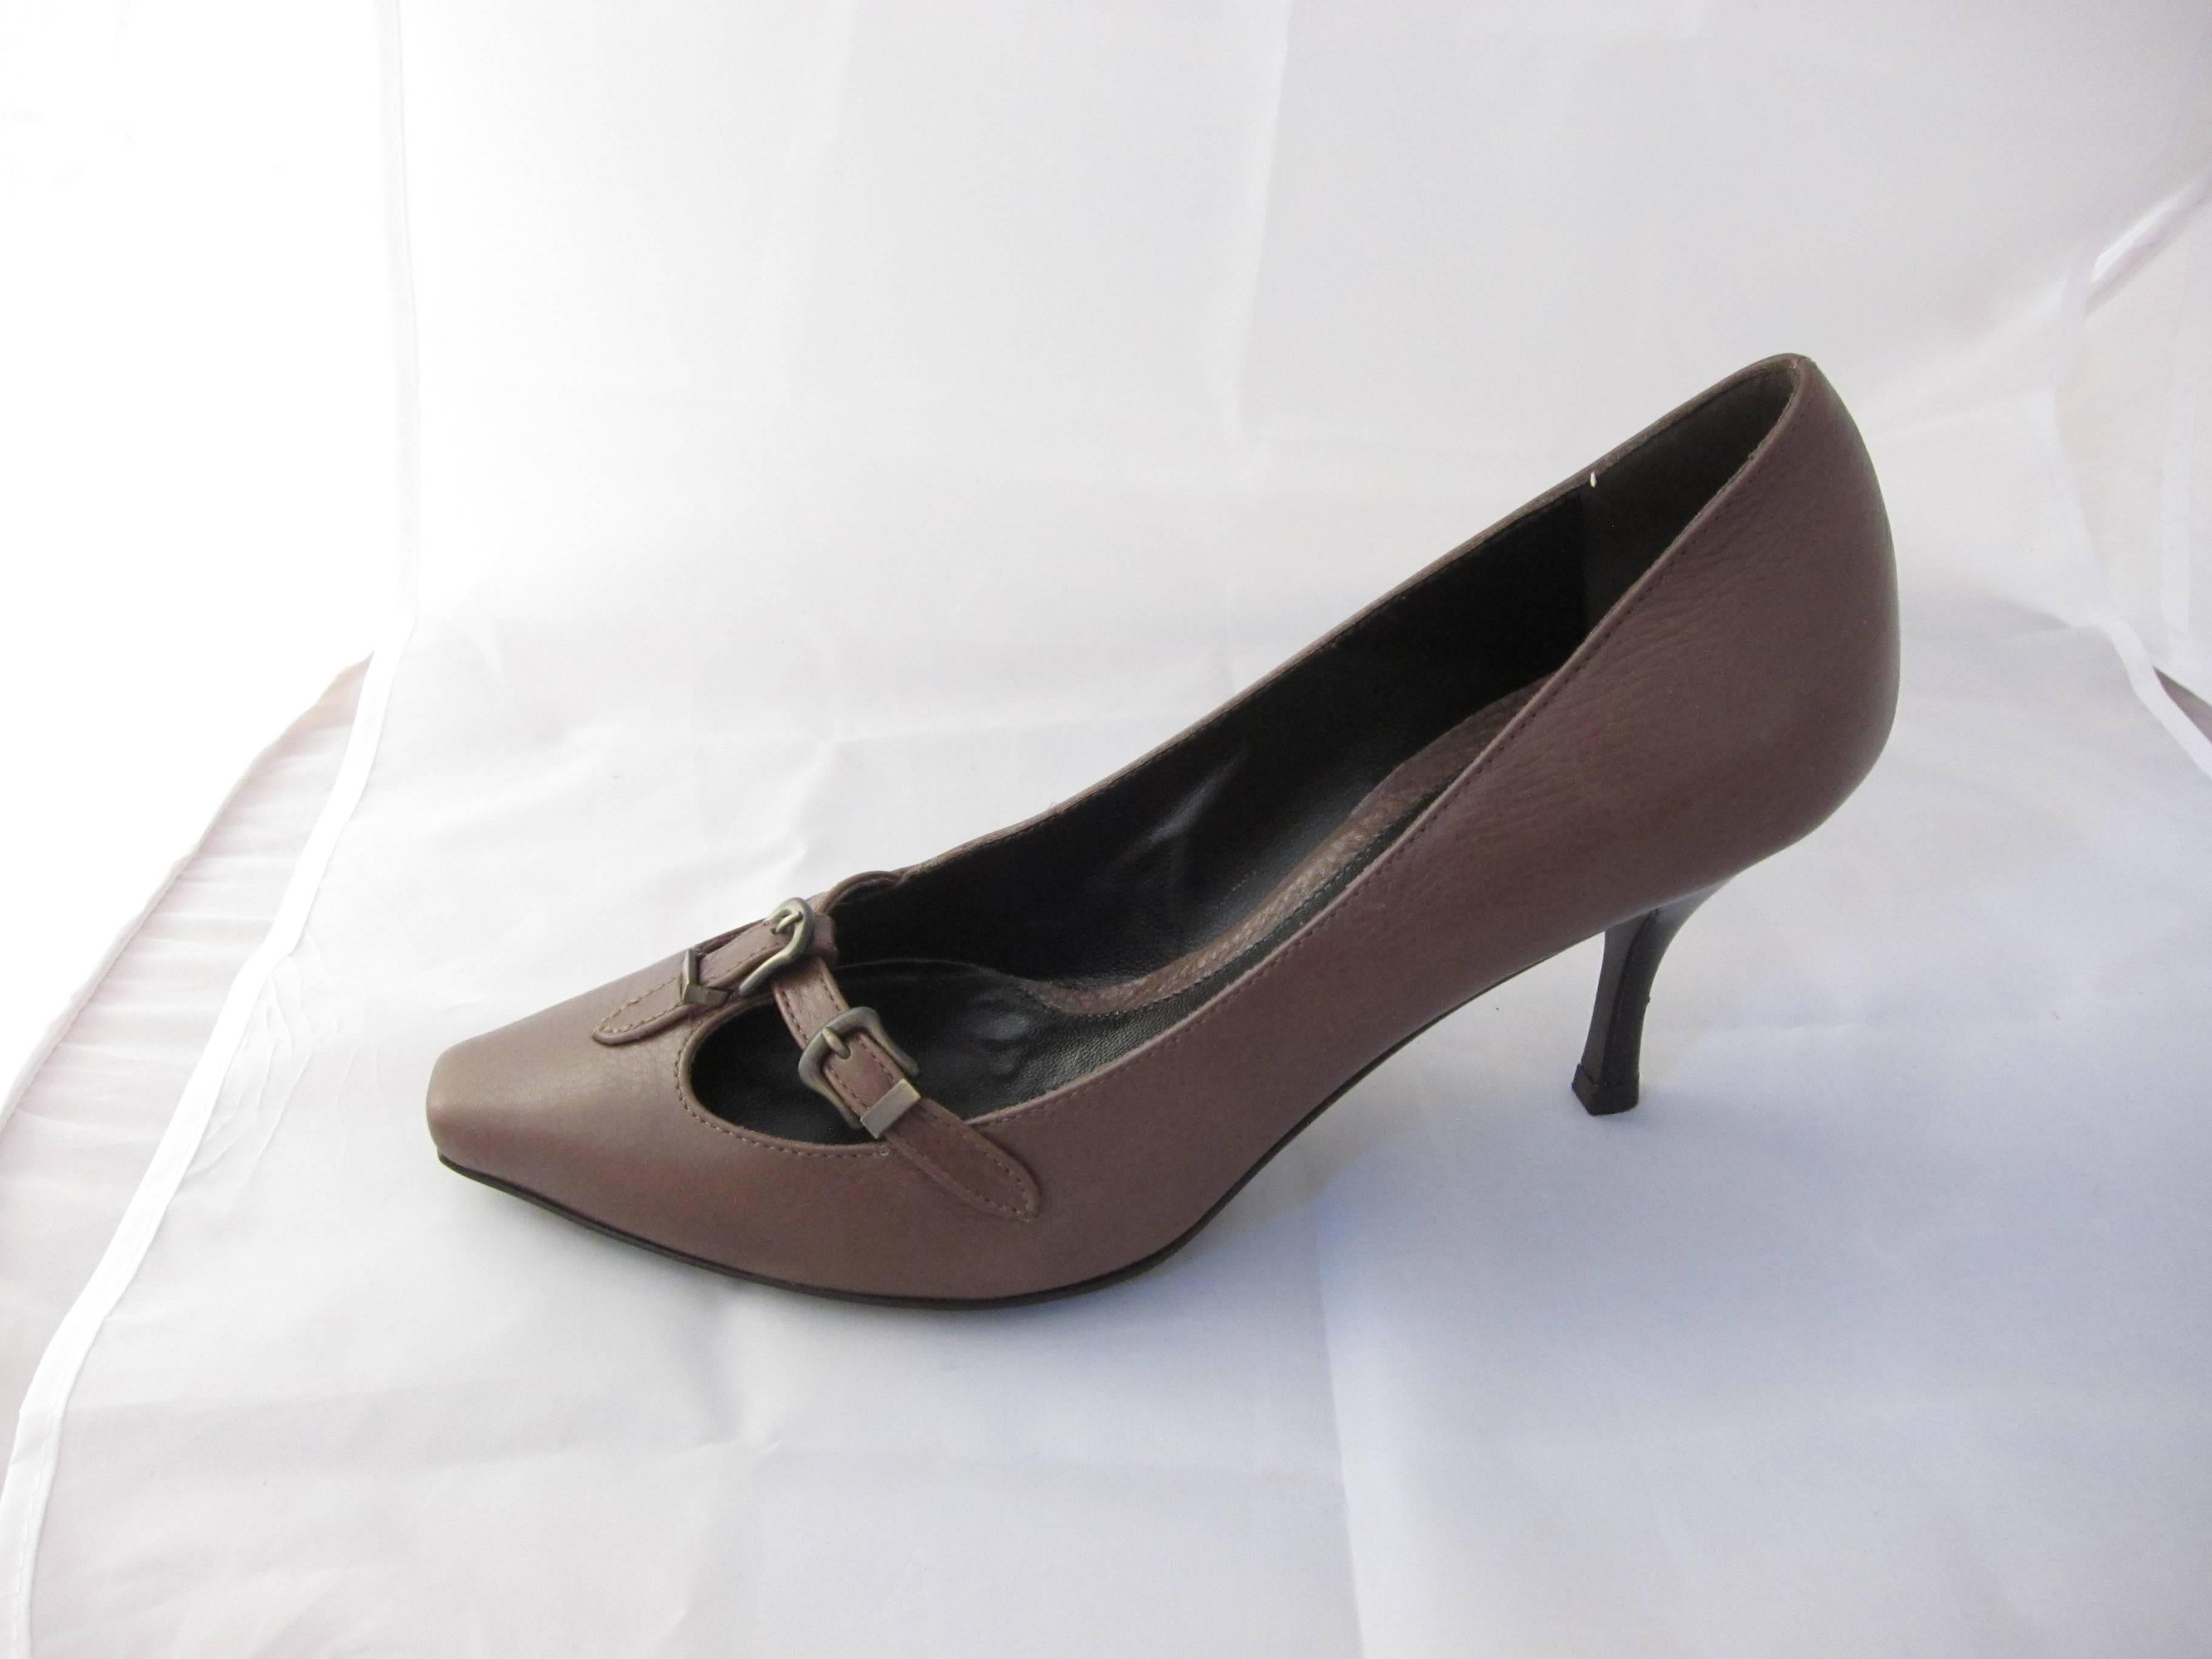 Black Fendi brown leather shoes with box. Size 37 For Sale